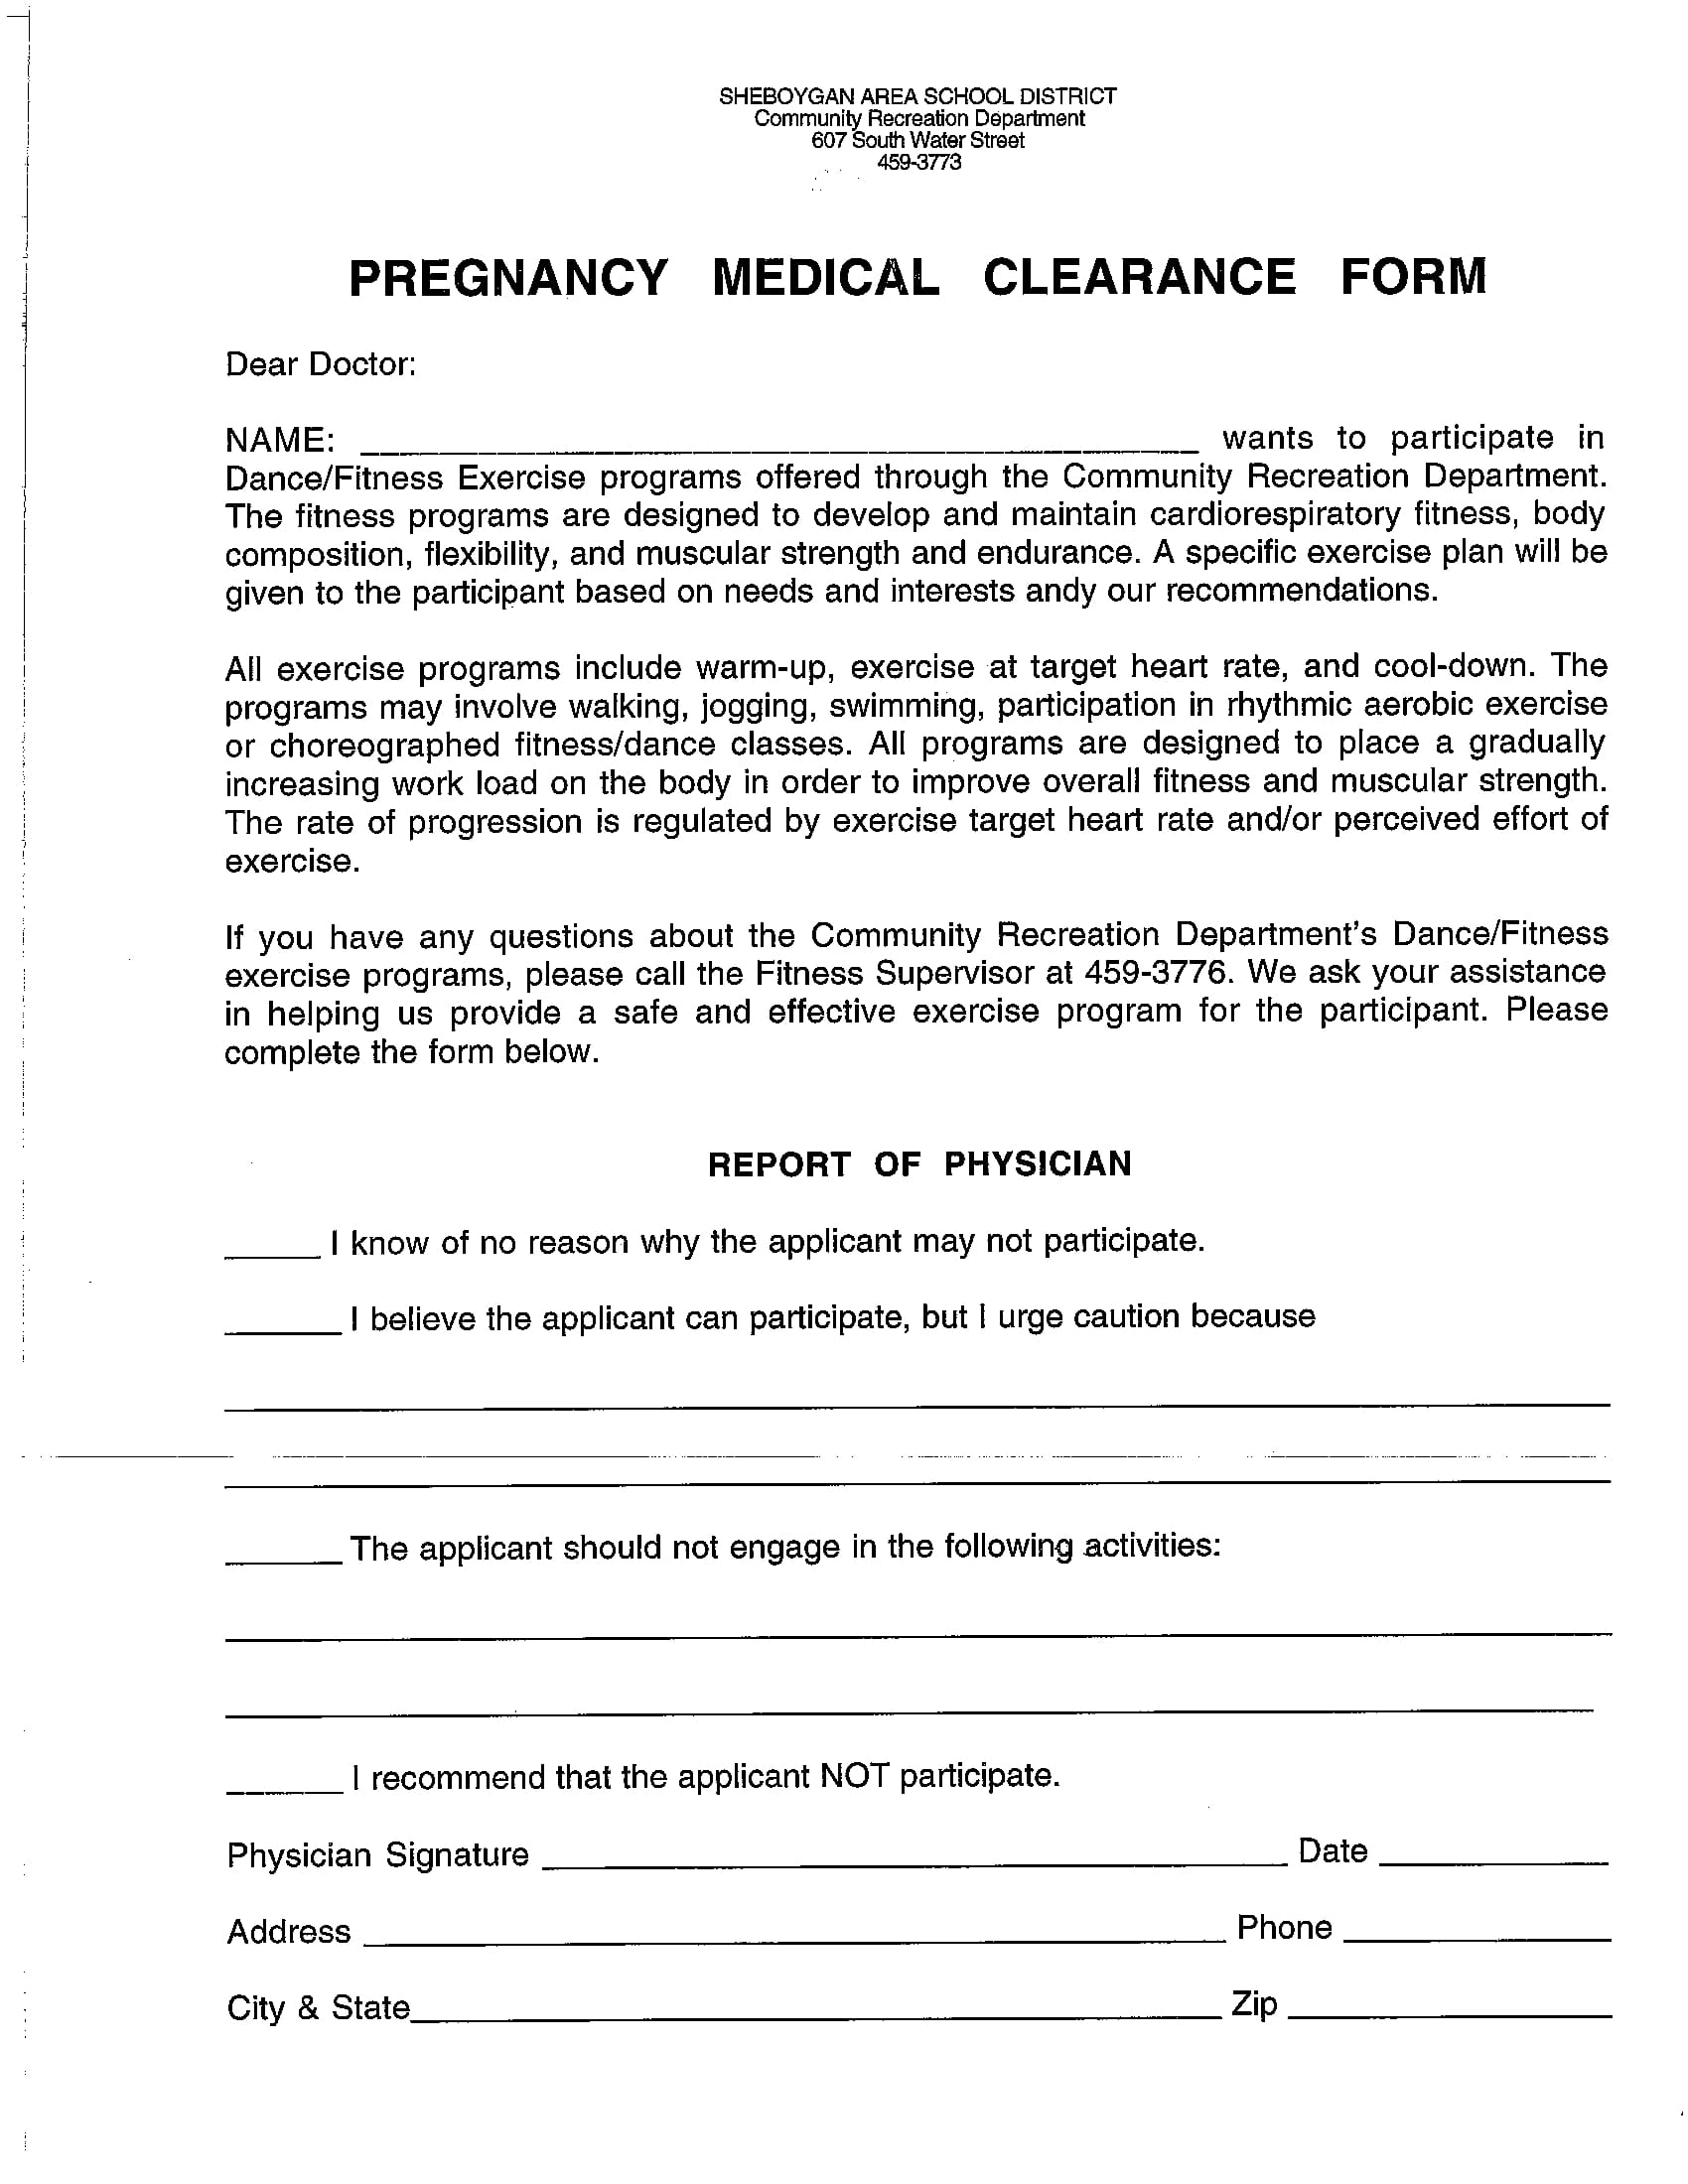 pregnancy medical clearance form 1